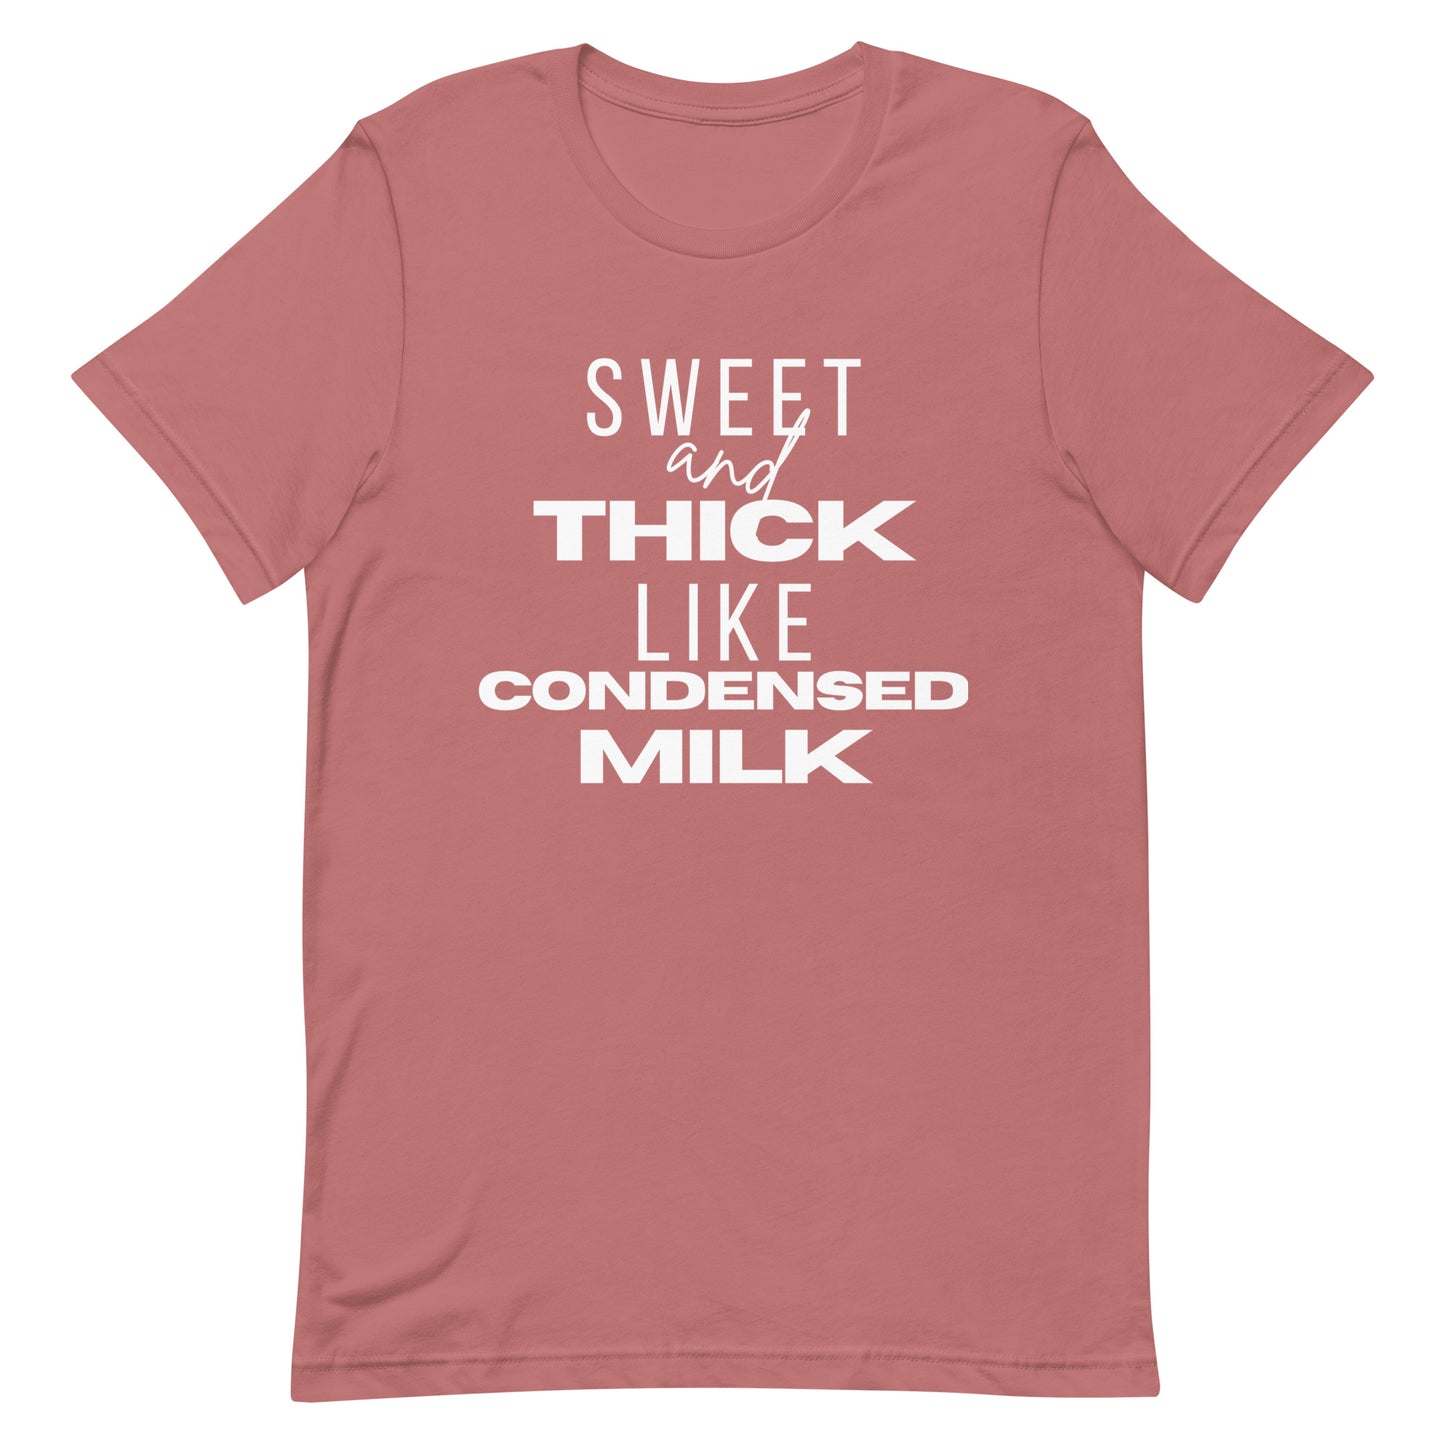 "Sweet and Thick like Condensed Milk" Unisex T-shirt